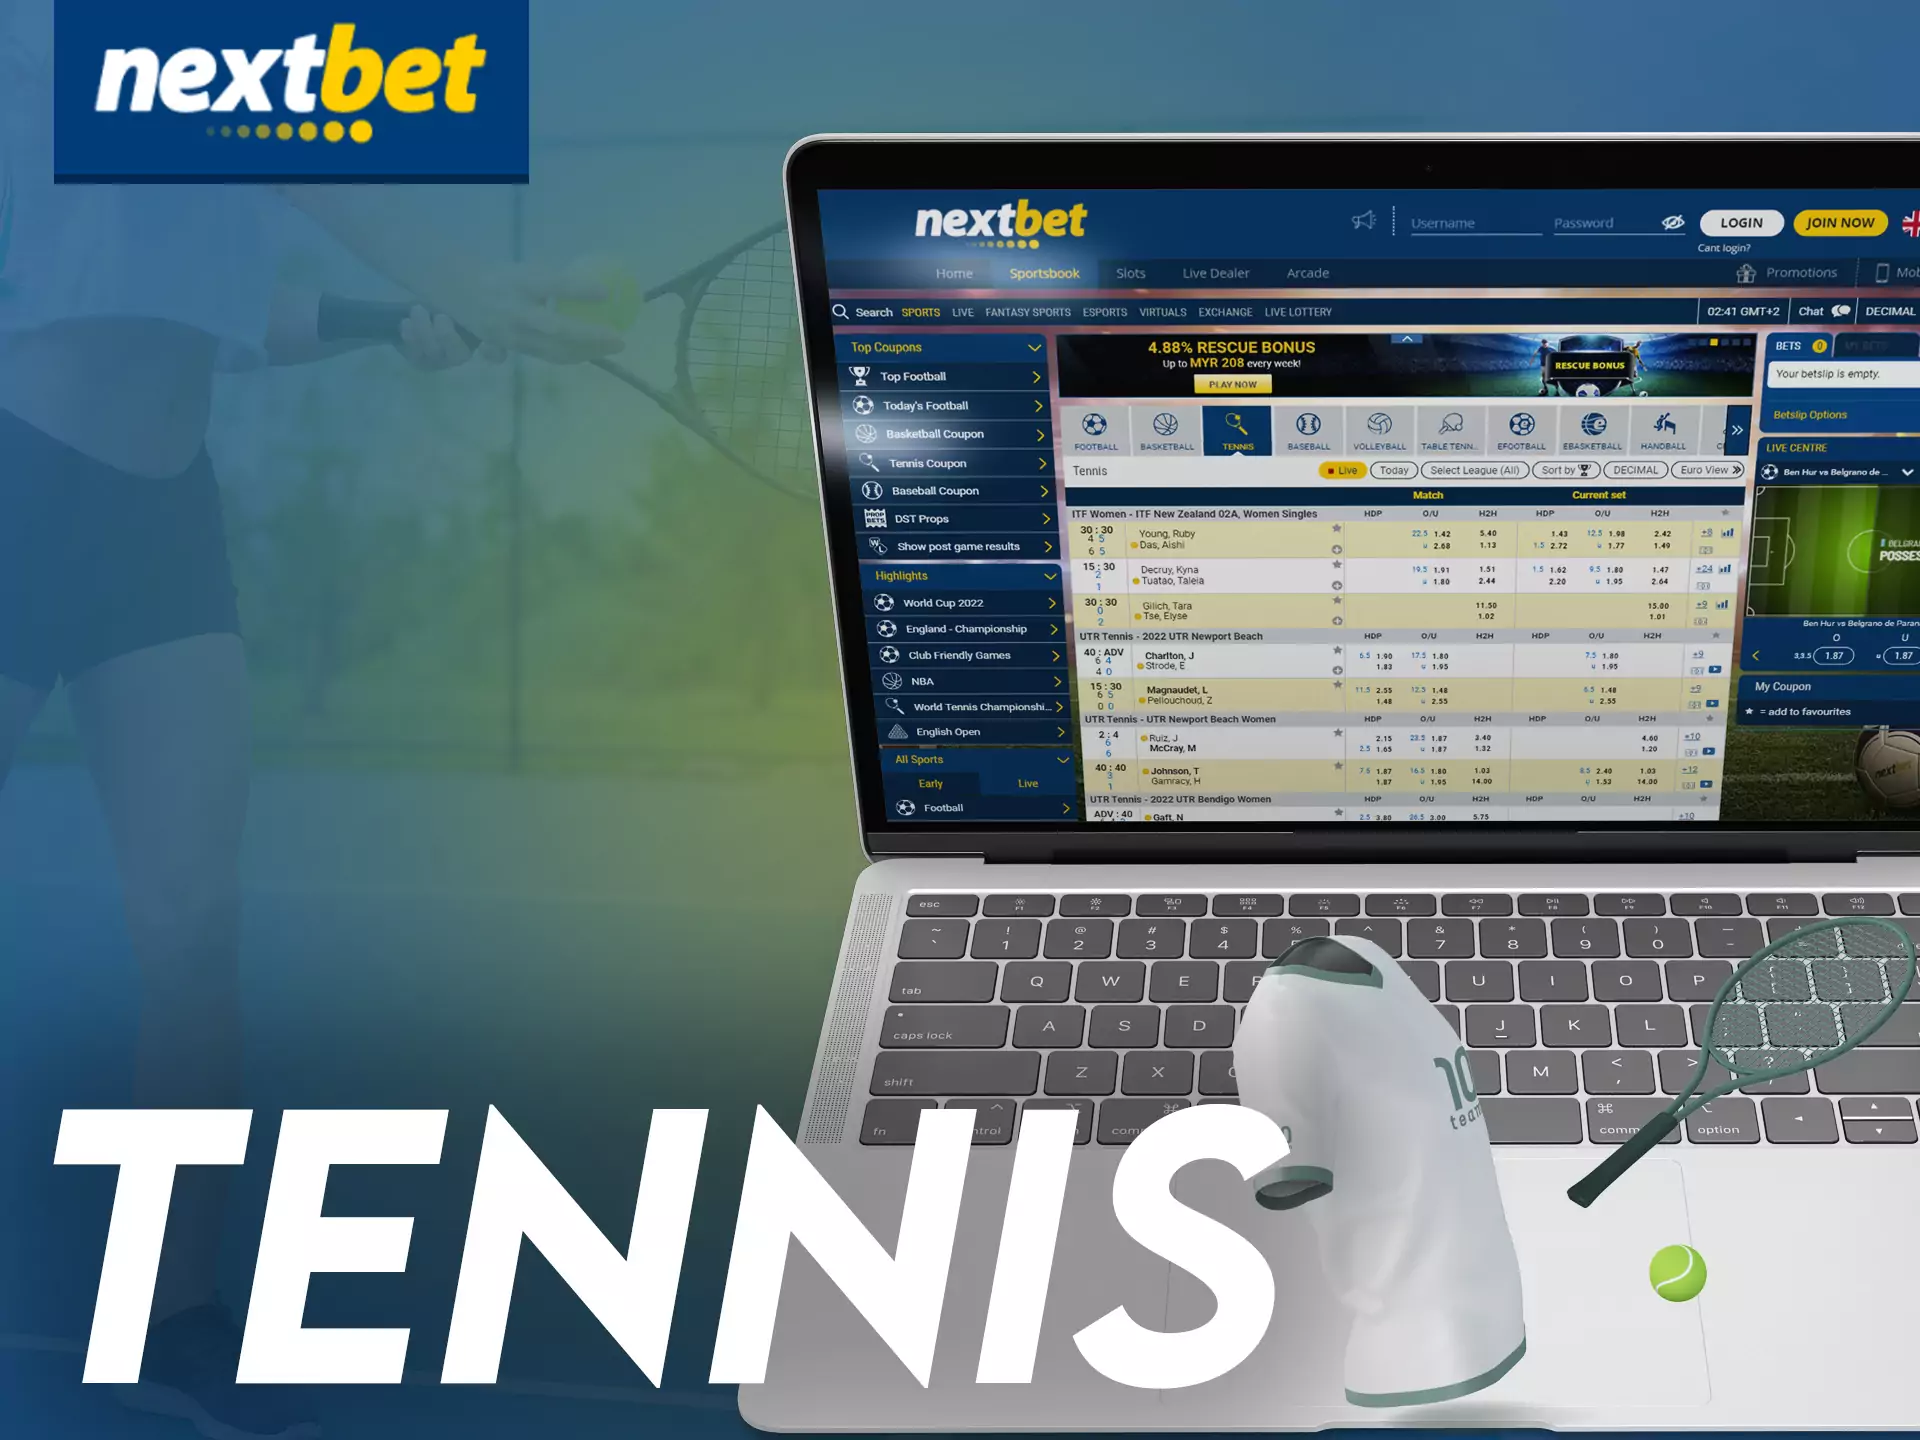 You can bet on tennis matches on Nextbet.